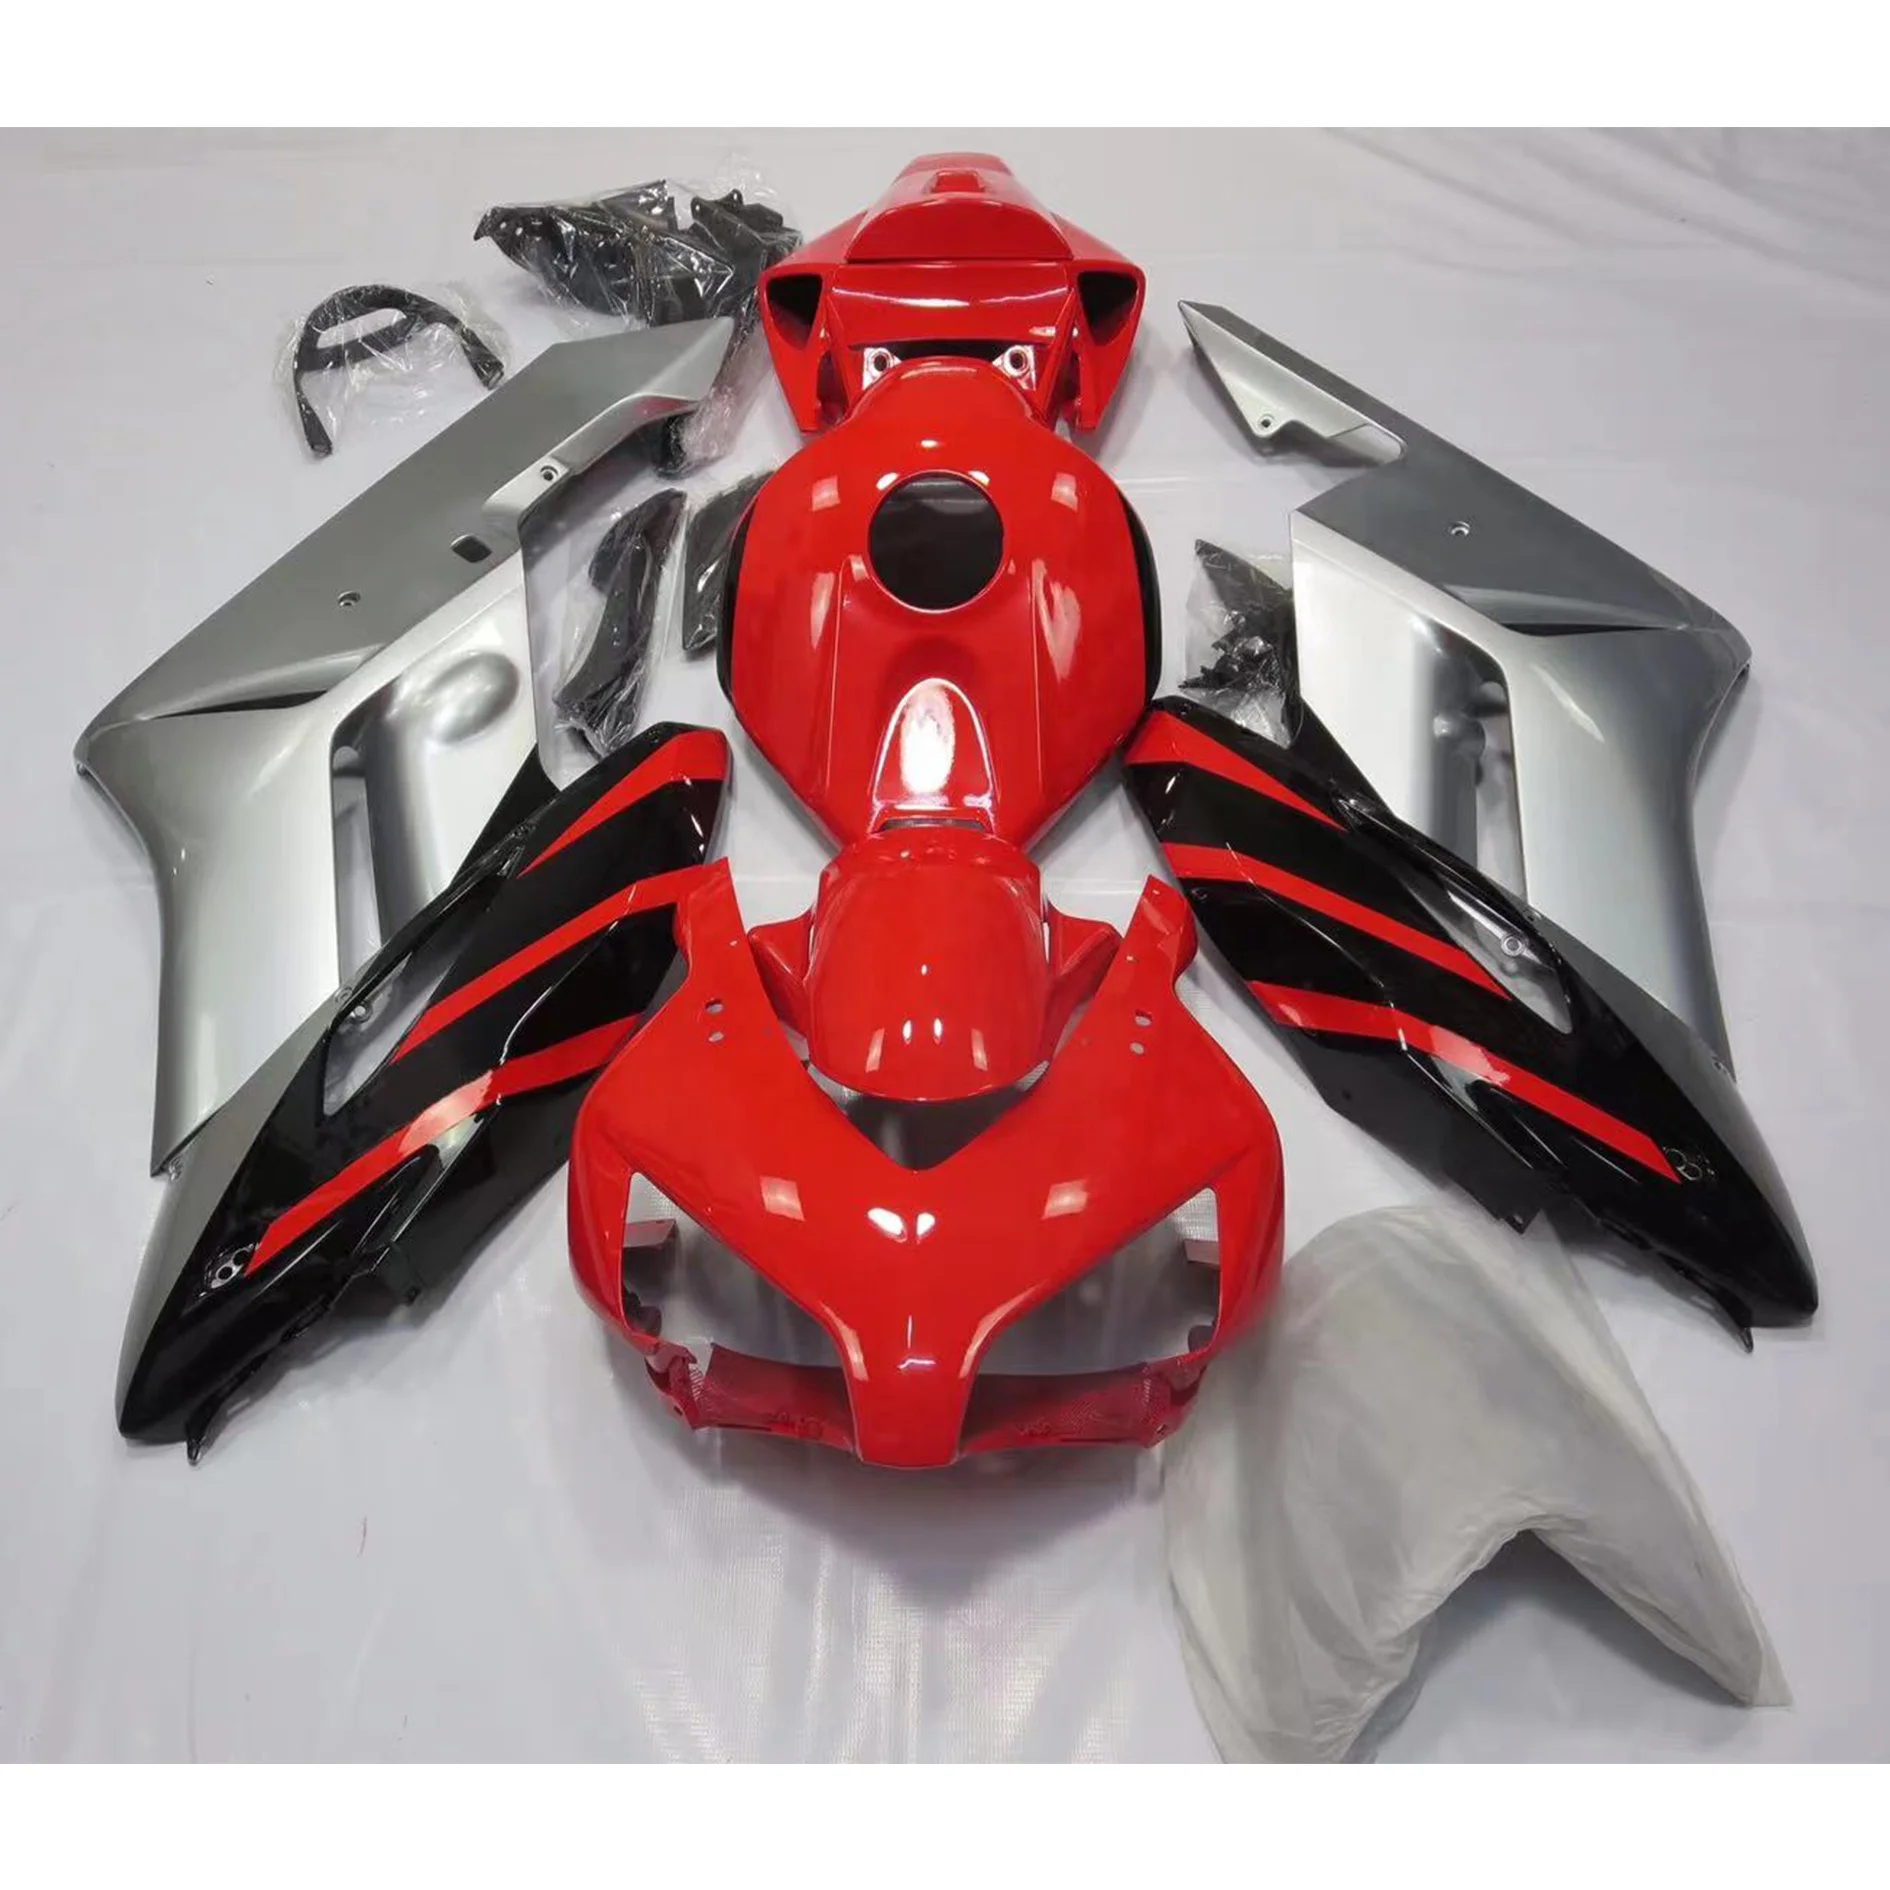 

2022 WHSC Silver And Red OEM Motorcycle Accessories For HONDA CBR1000 RR 2004-2005 04 05 Motorcycle Body Systems Fairing Kits, Pictures shown